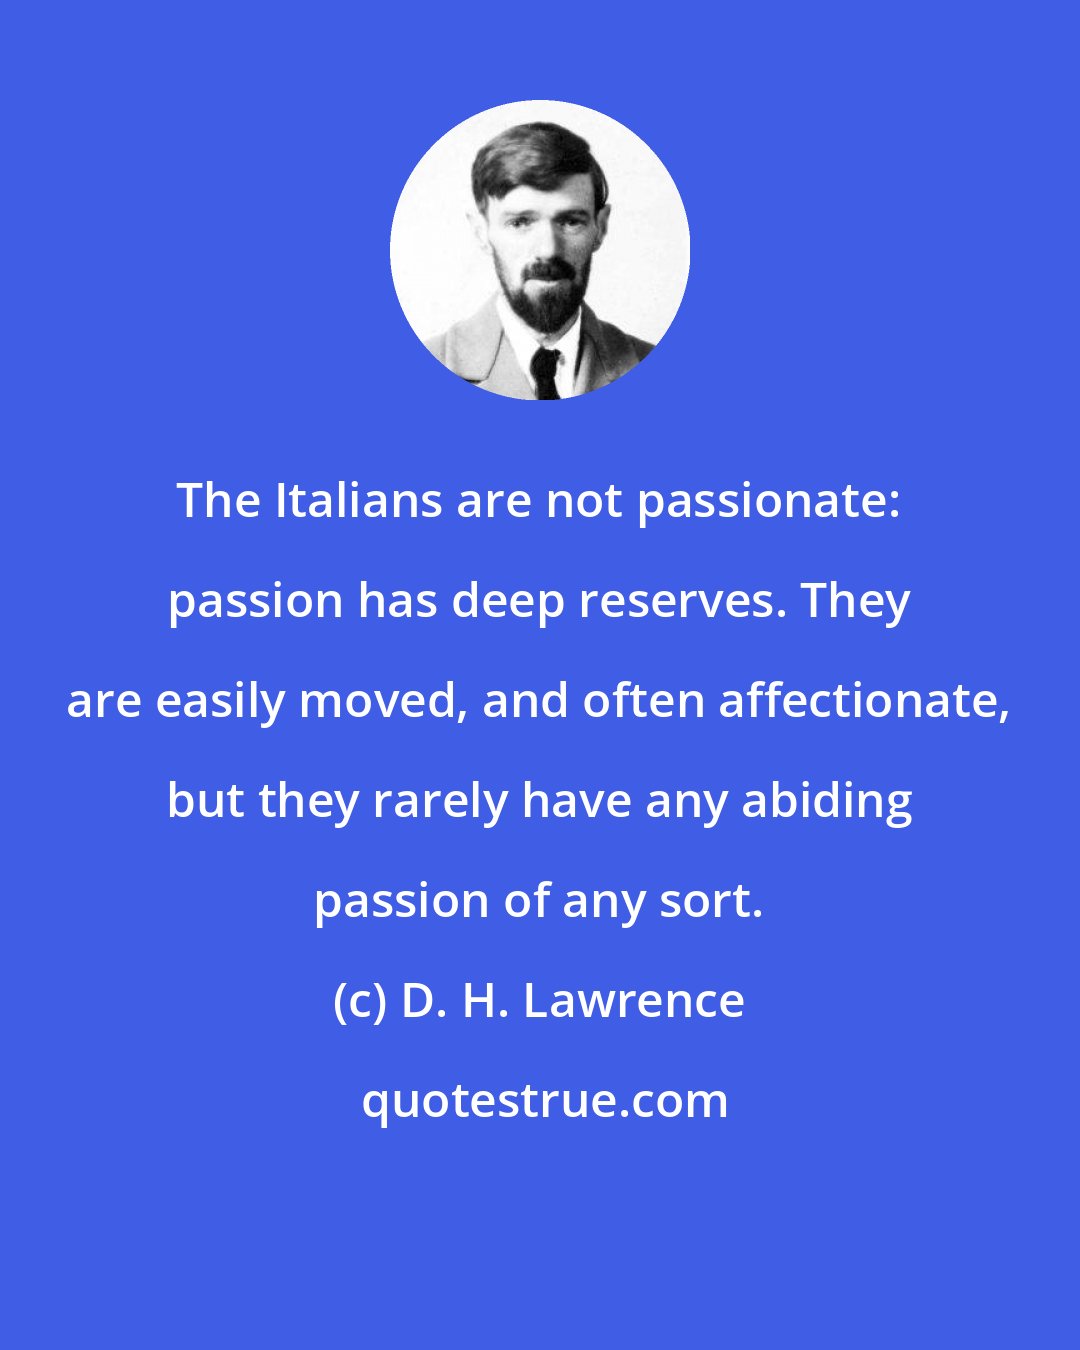 D. H. Lawrence: The Italians are not passionate: passion has deep reserves. They are easily moved, and often affectionate, but they rarely have any abiding passion of any sort.